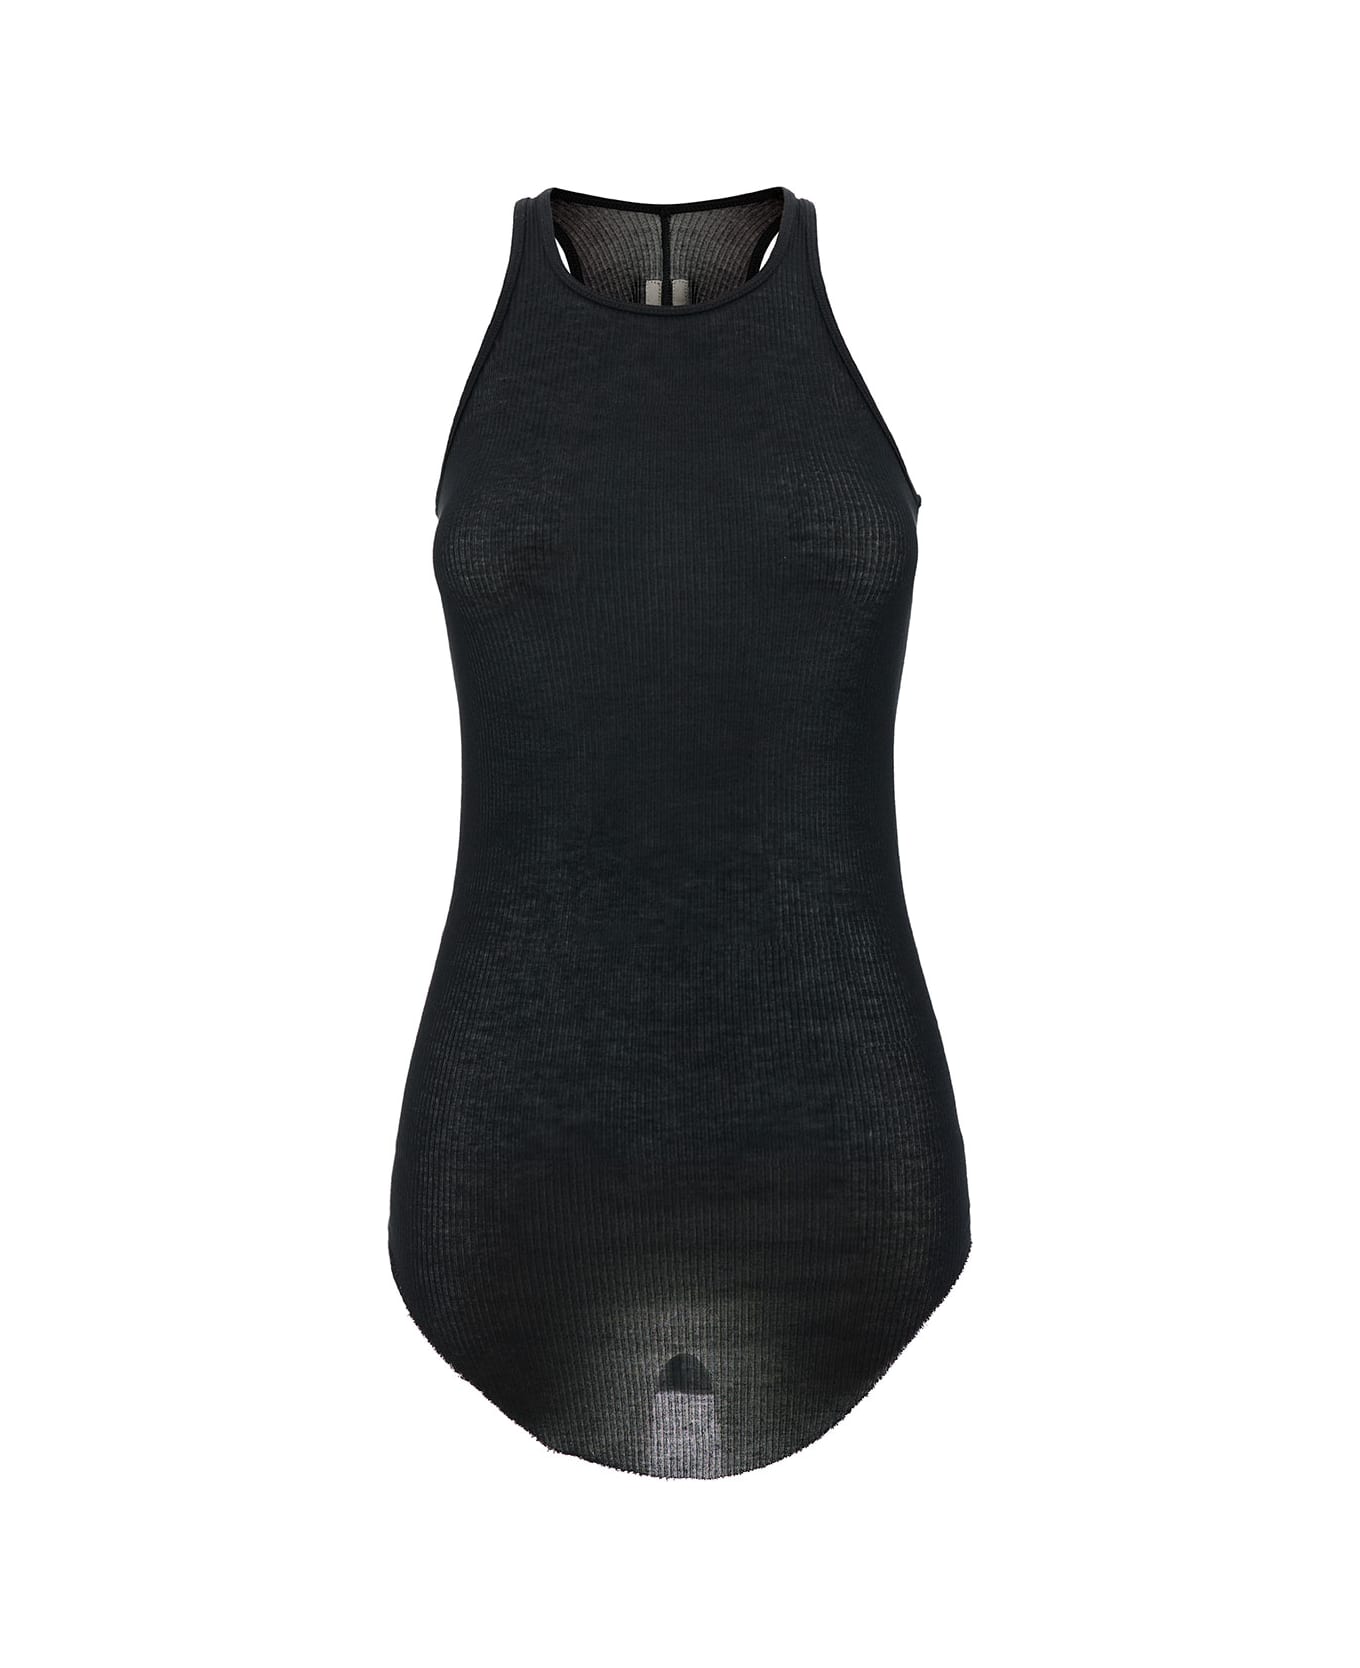 Rick Owens Black Ribbed Tank Top With Curved Hem In Viscose And Silk Blend Woman - BLACK